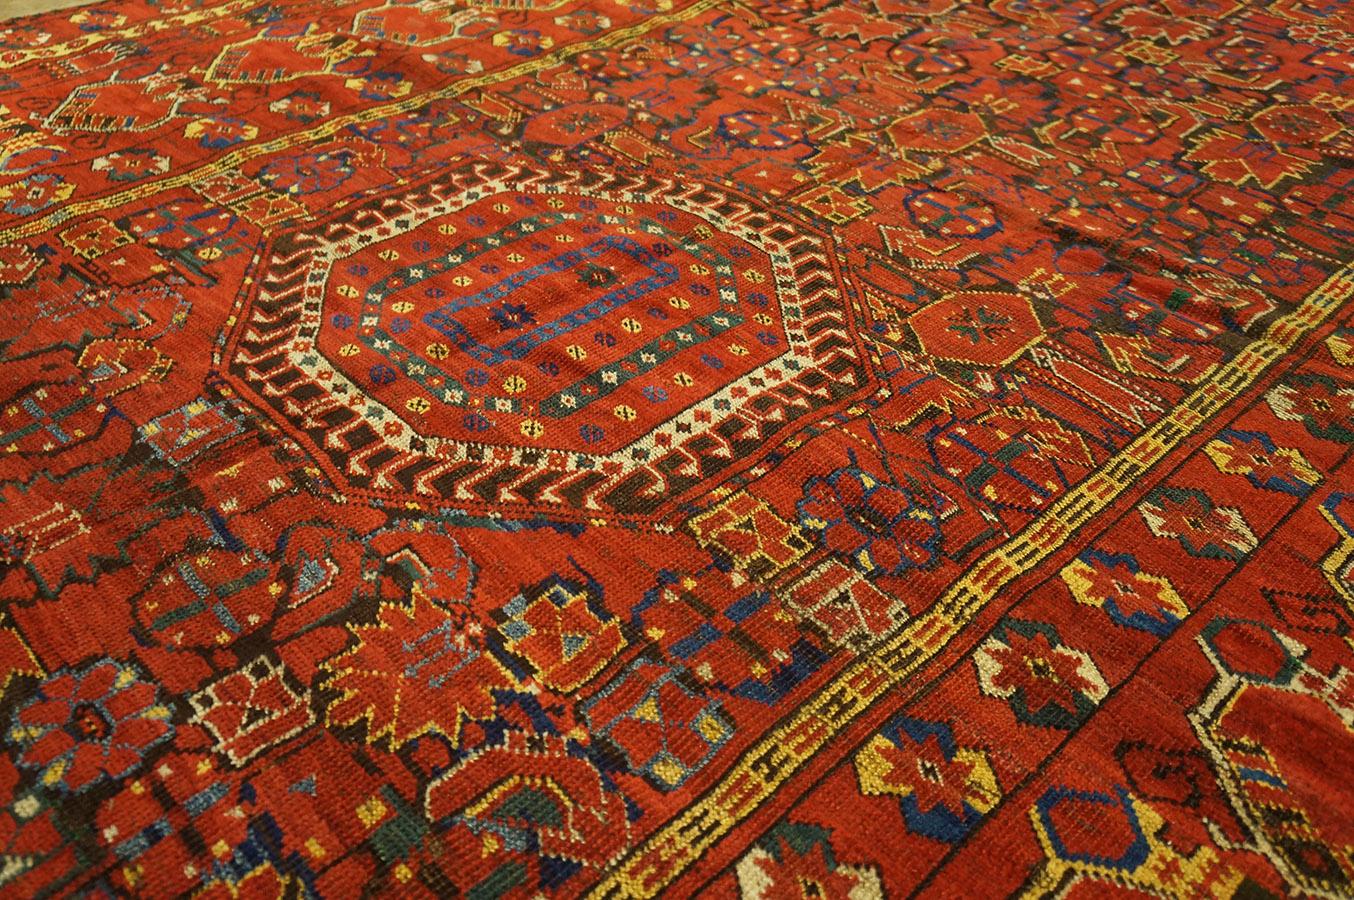 Hand-Knotted 19th Century Central Asian Ersari-Beshir Gallery Carpet (6'6